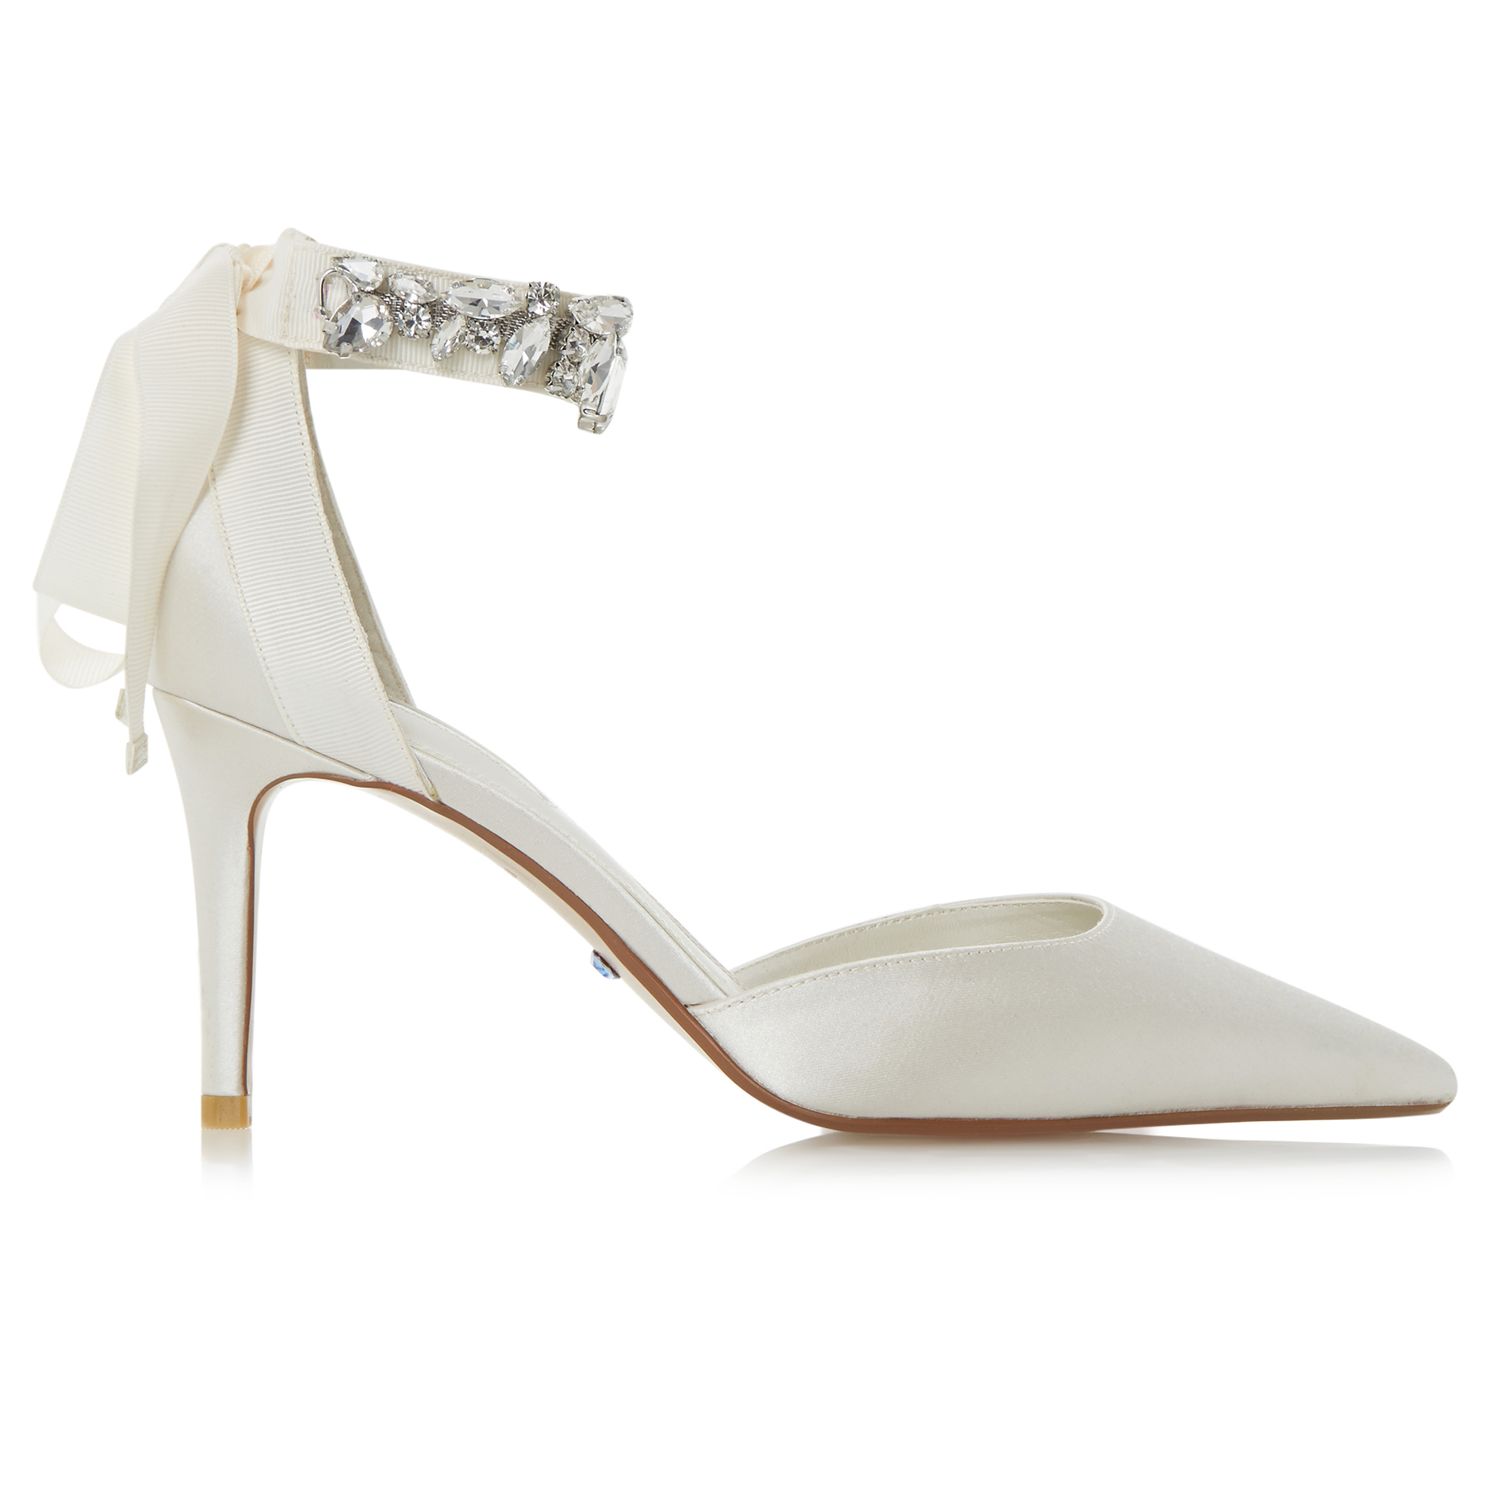 Dune Bridal Collection Diamond Embellished Pointed Toe Court Shoes, Ivory